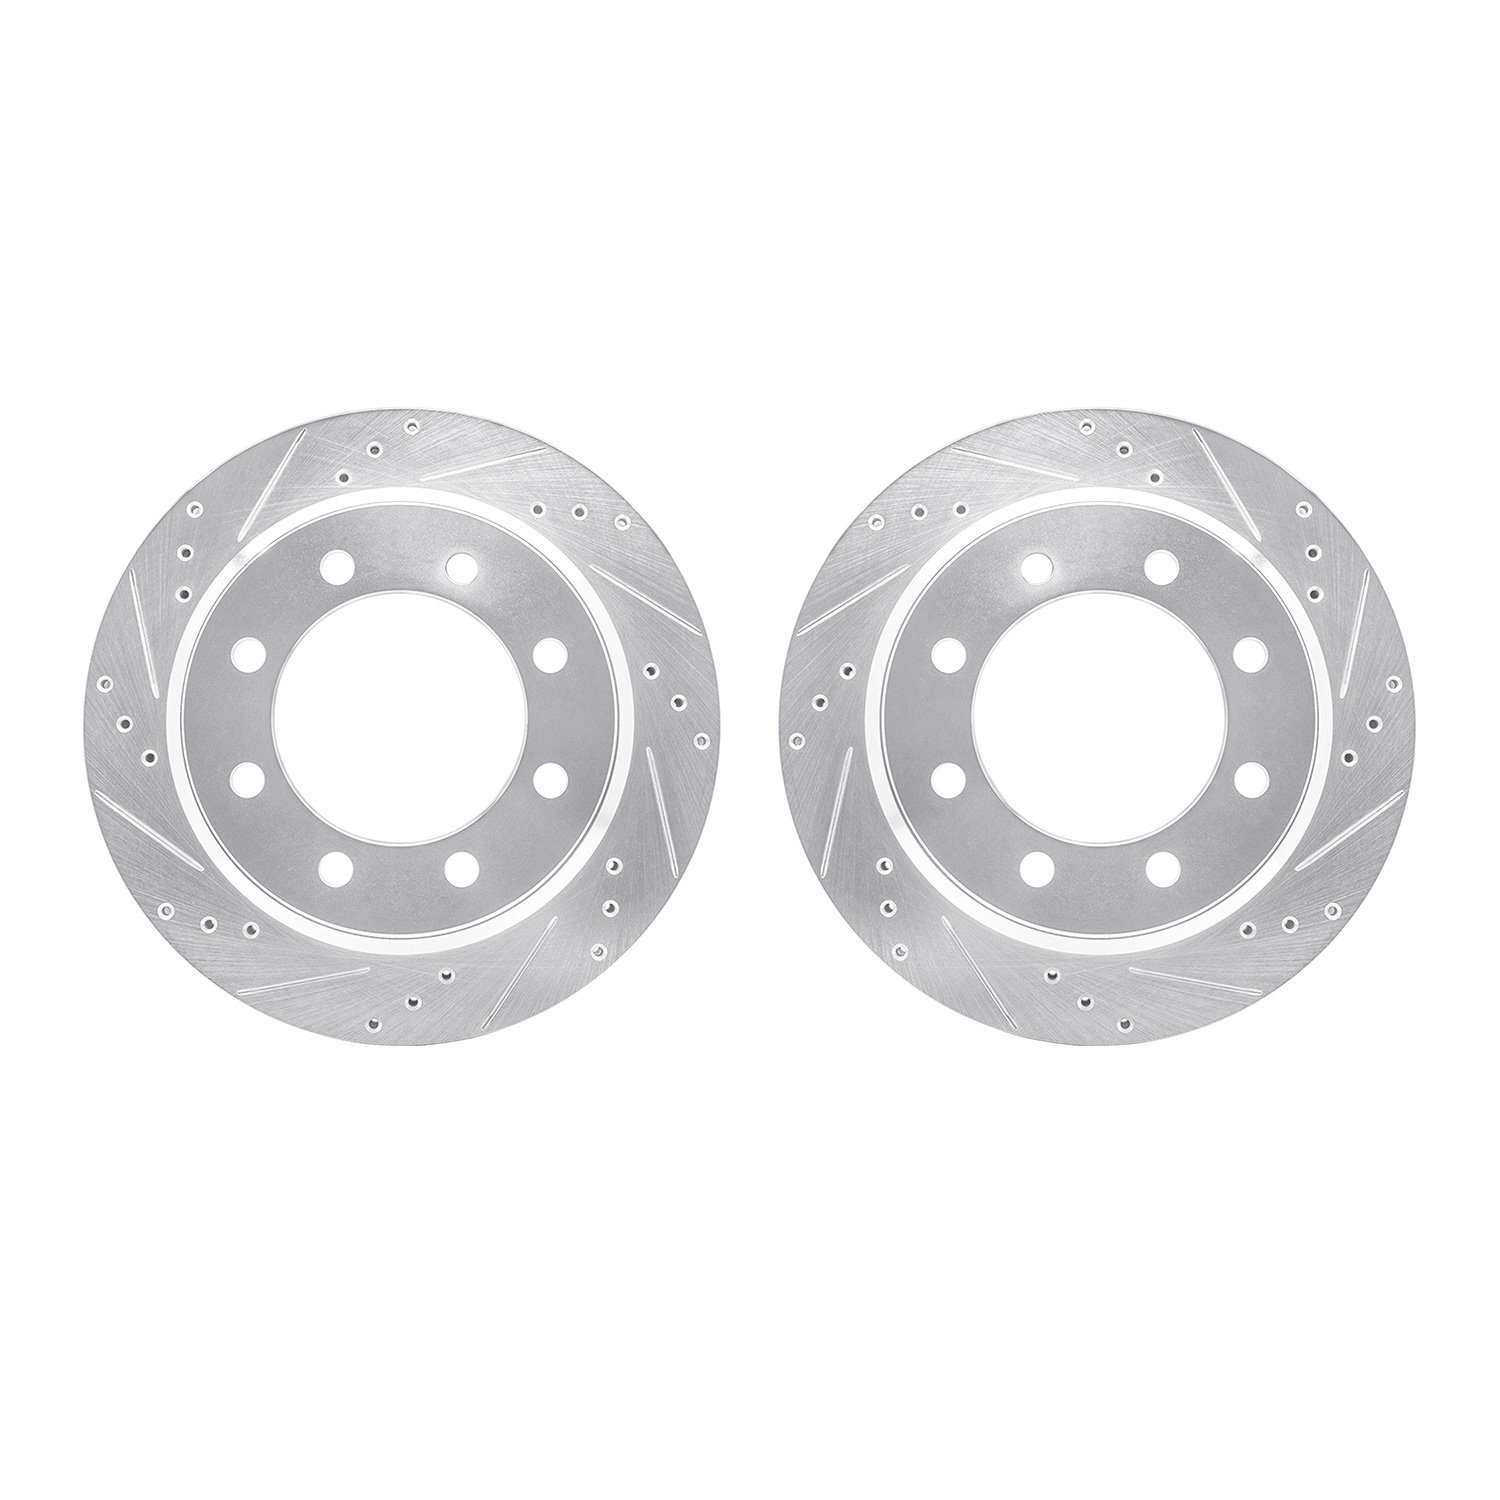 7002-54189 Drilled/Slotted Brake Rotors [Silver], Fits Select Ford/Lincoln/Mercury/Mazda, Position: Rear